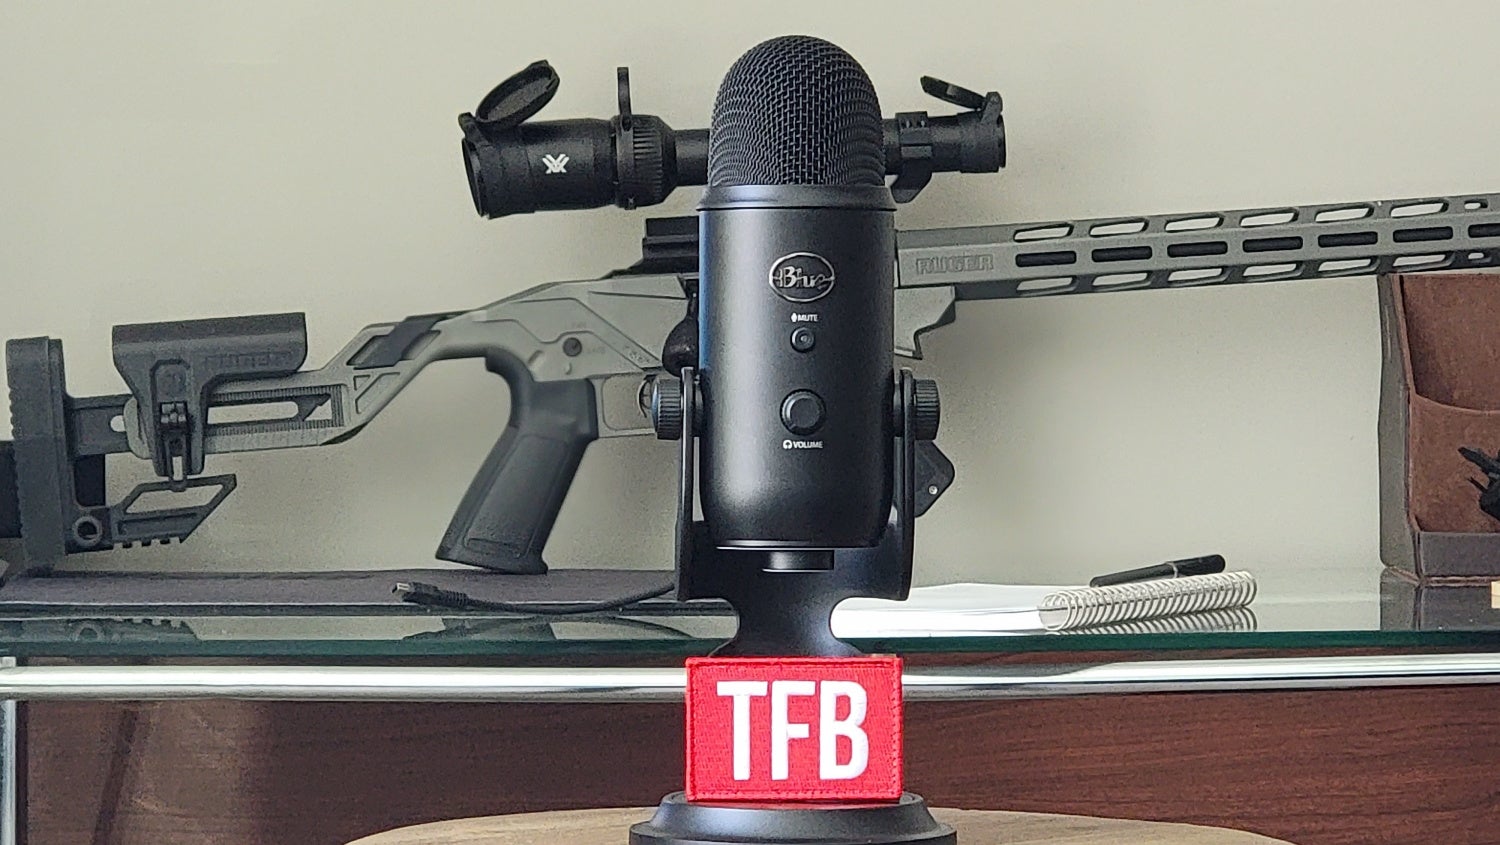 TFB Podcast Roundup 39: Talking about Bad Habits